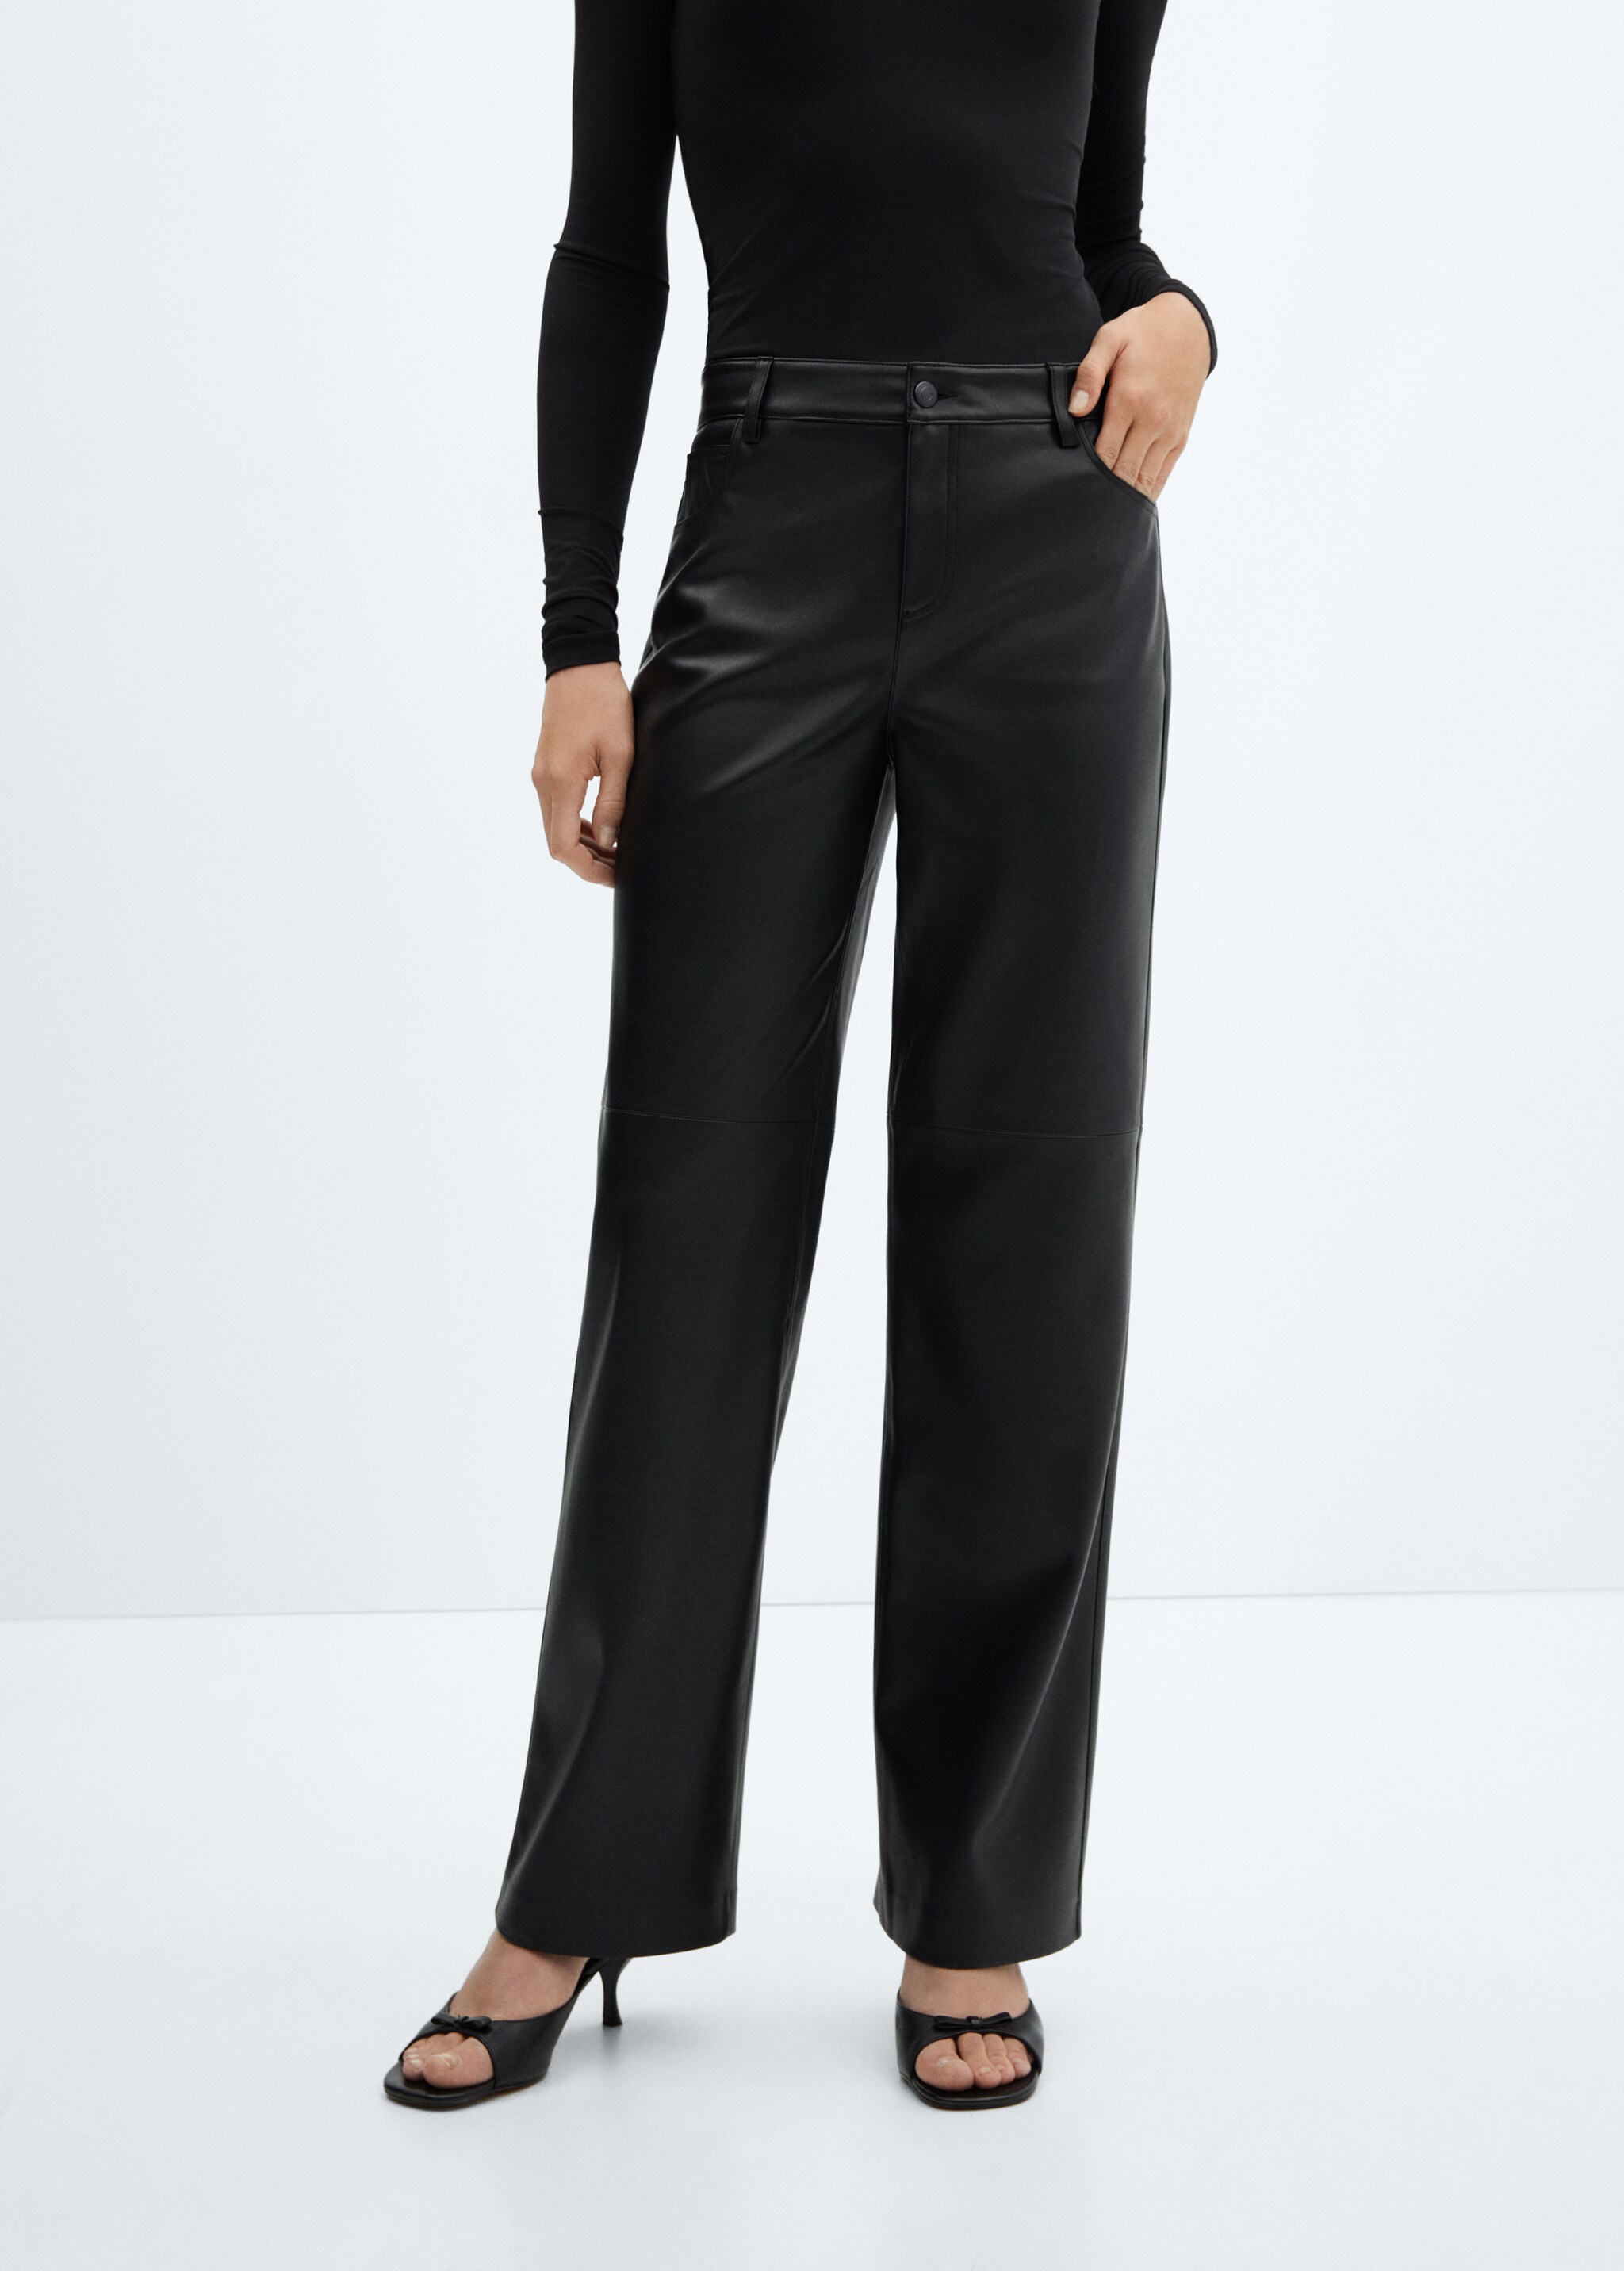 Mid-rise leather effect trousers - Medium plane